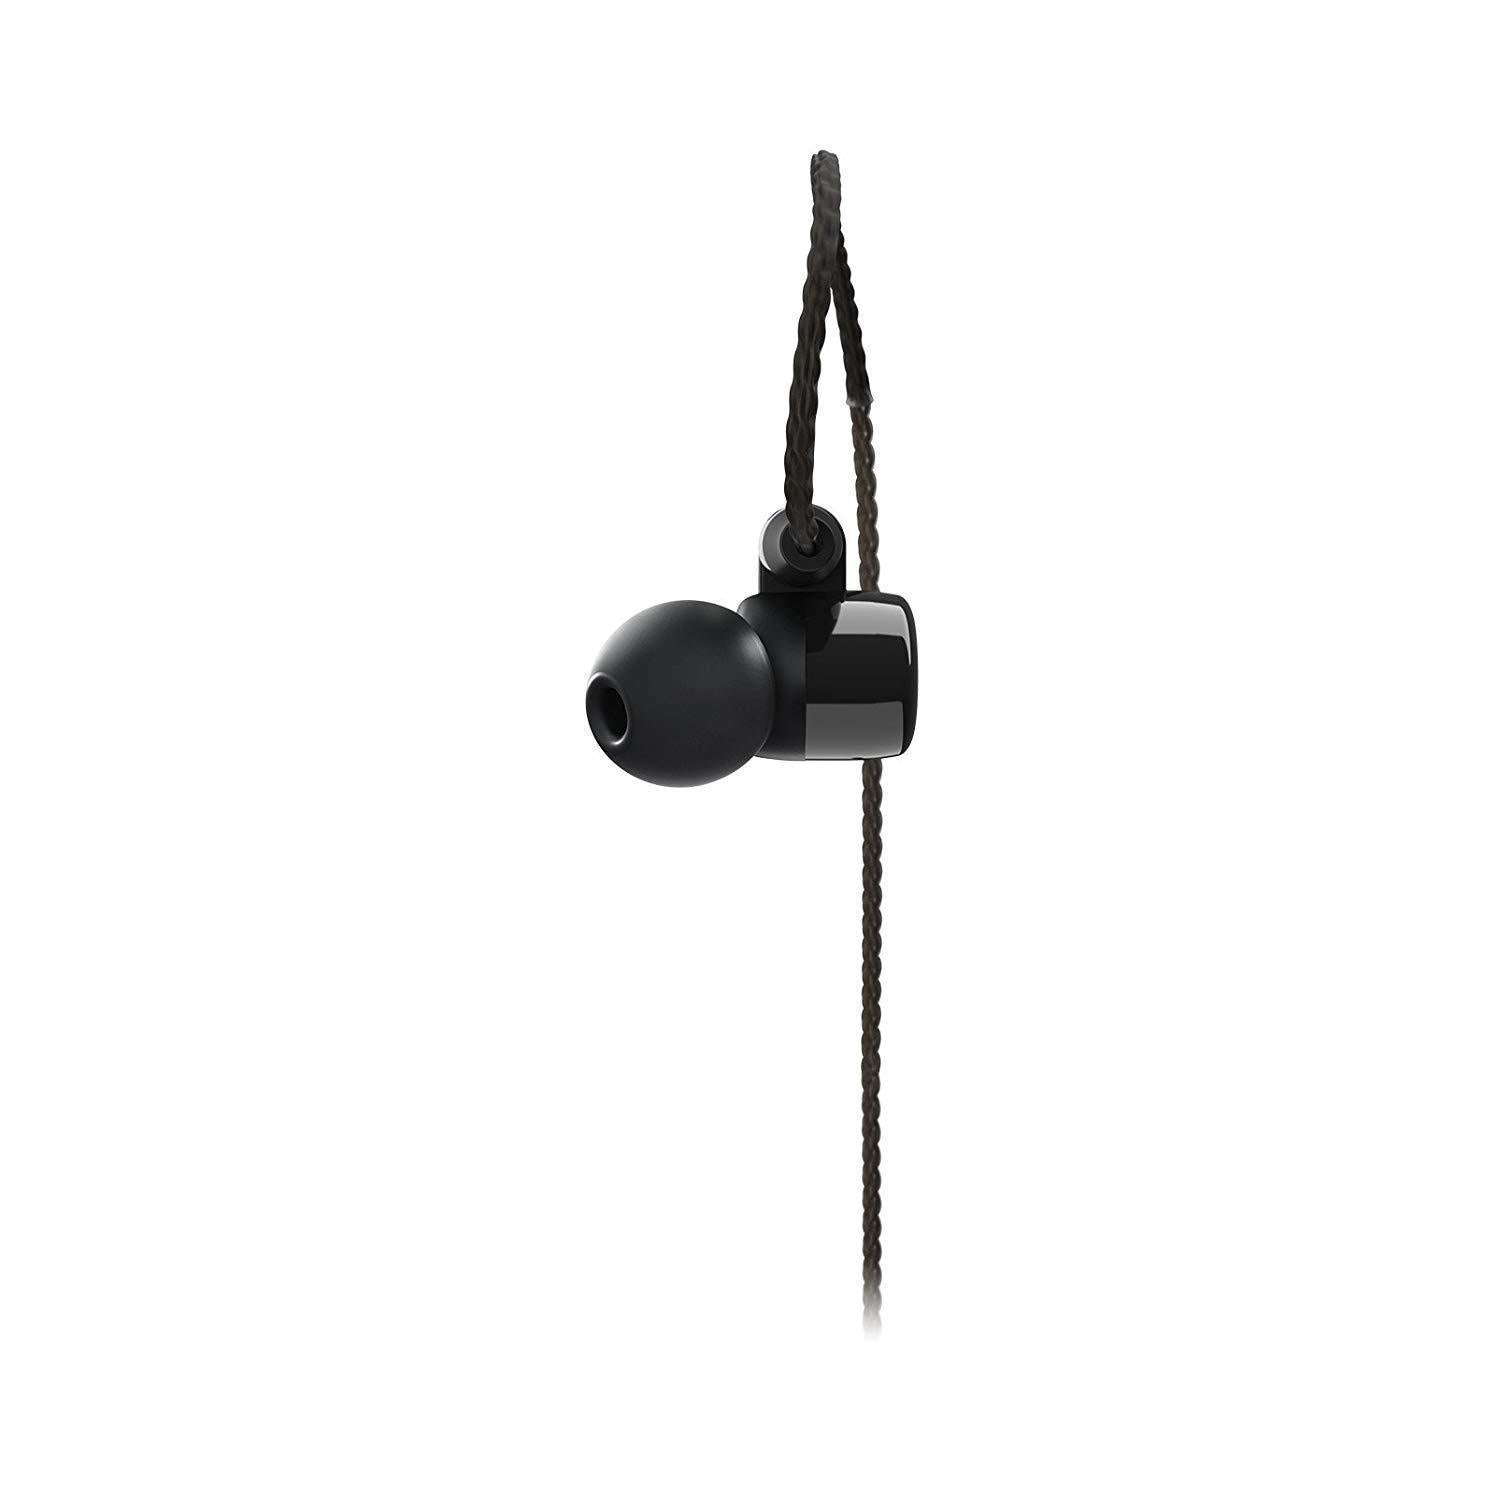 AKG N5005 Reference Class 5-Driver Configuration In-Ear Headphones